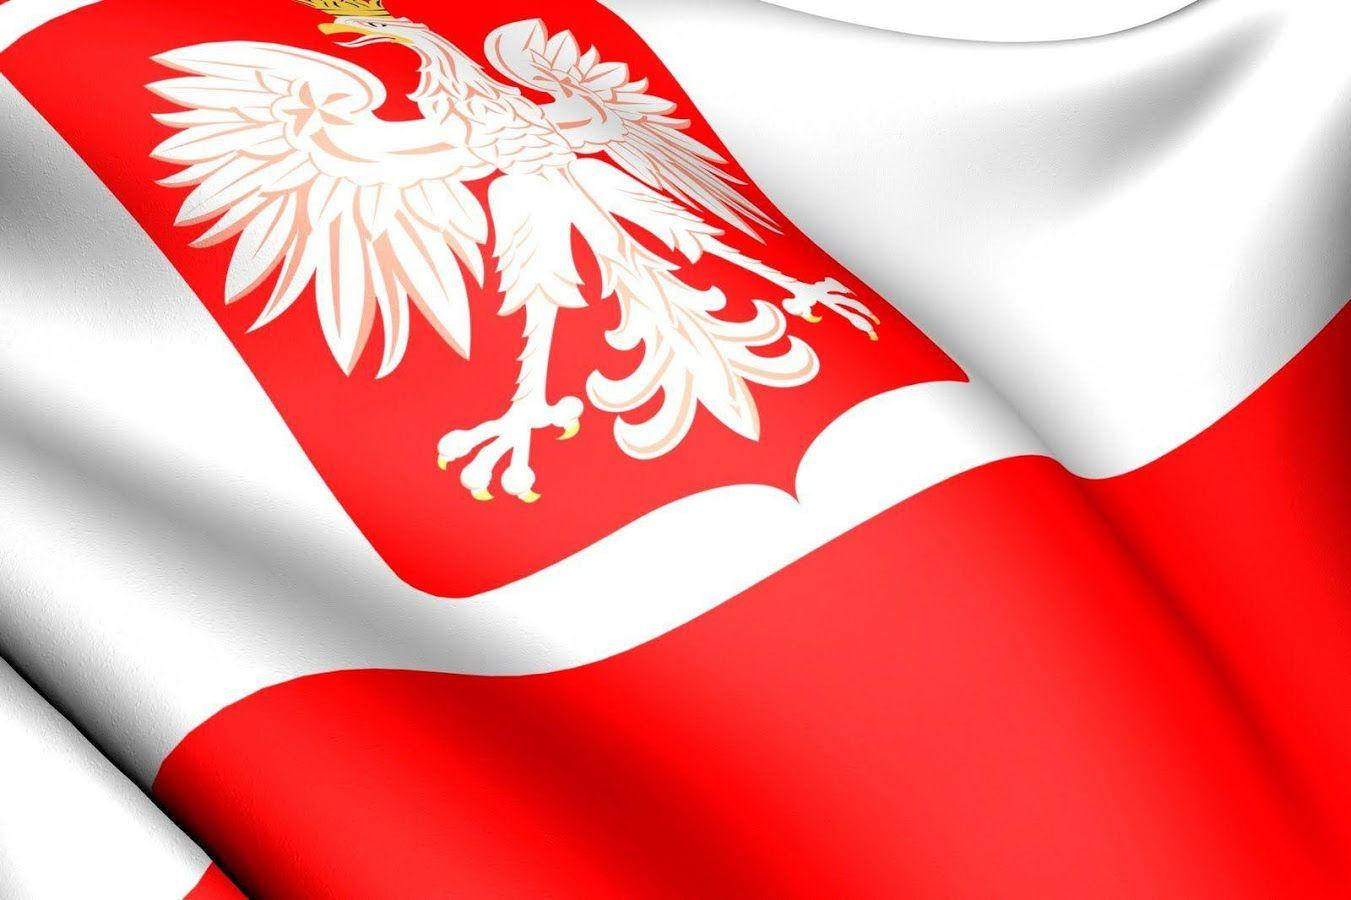 The Proud Polish Flag Fluttering In The Wind Against A Clear Blue Sky. Background